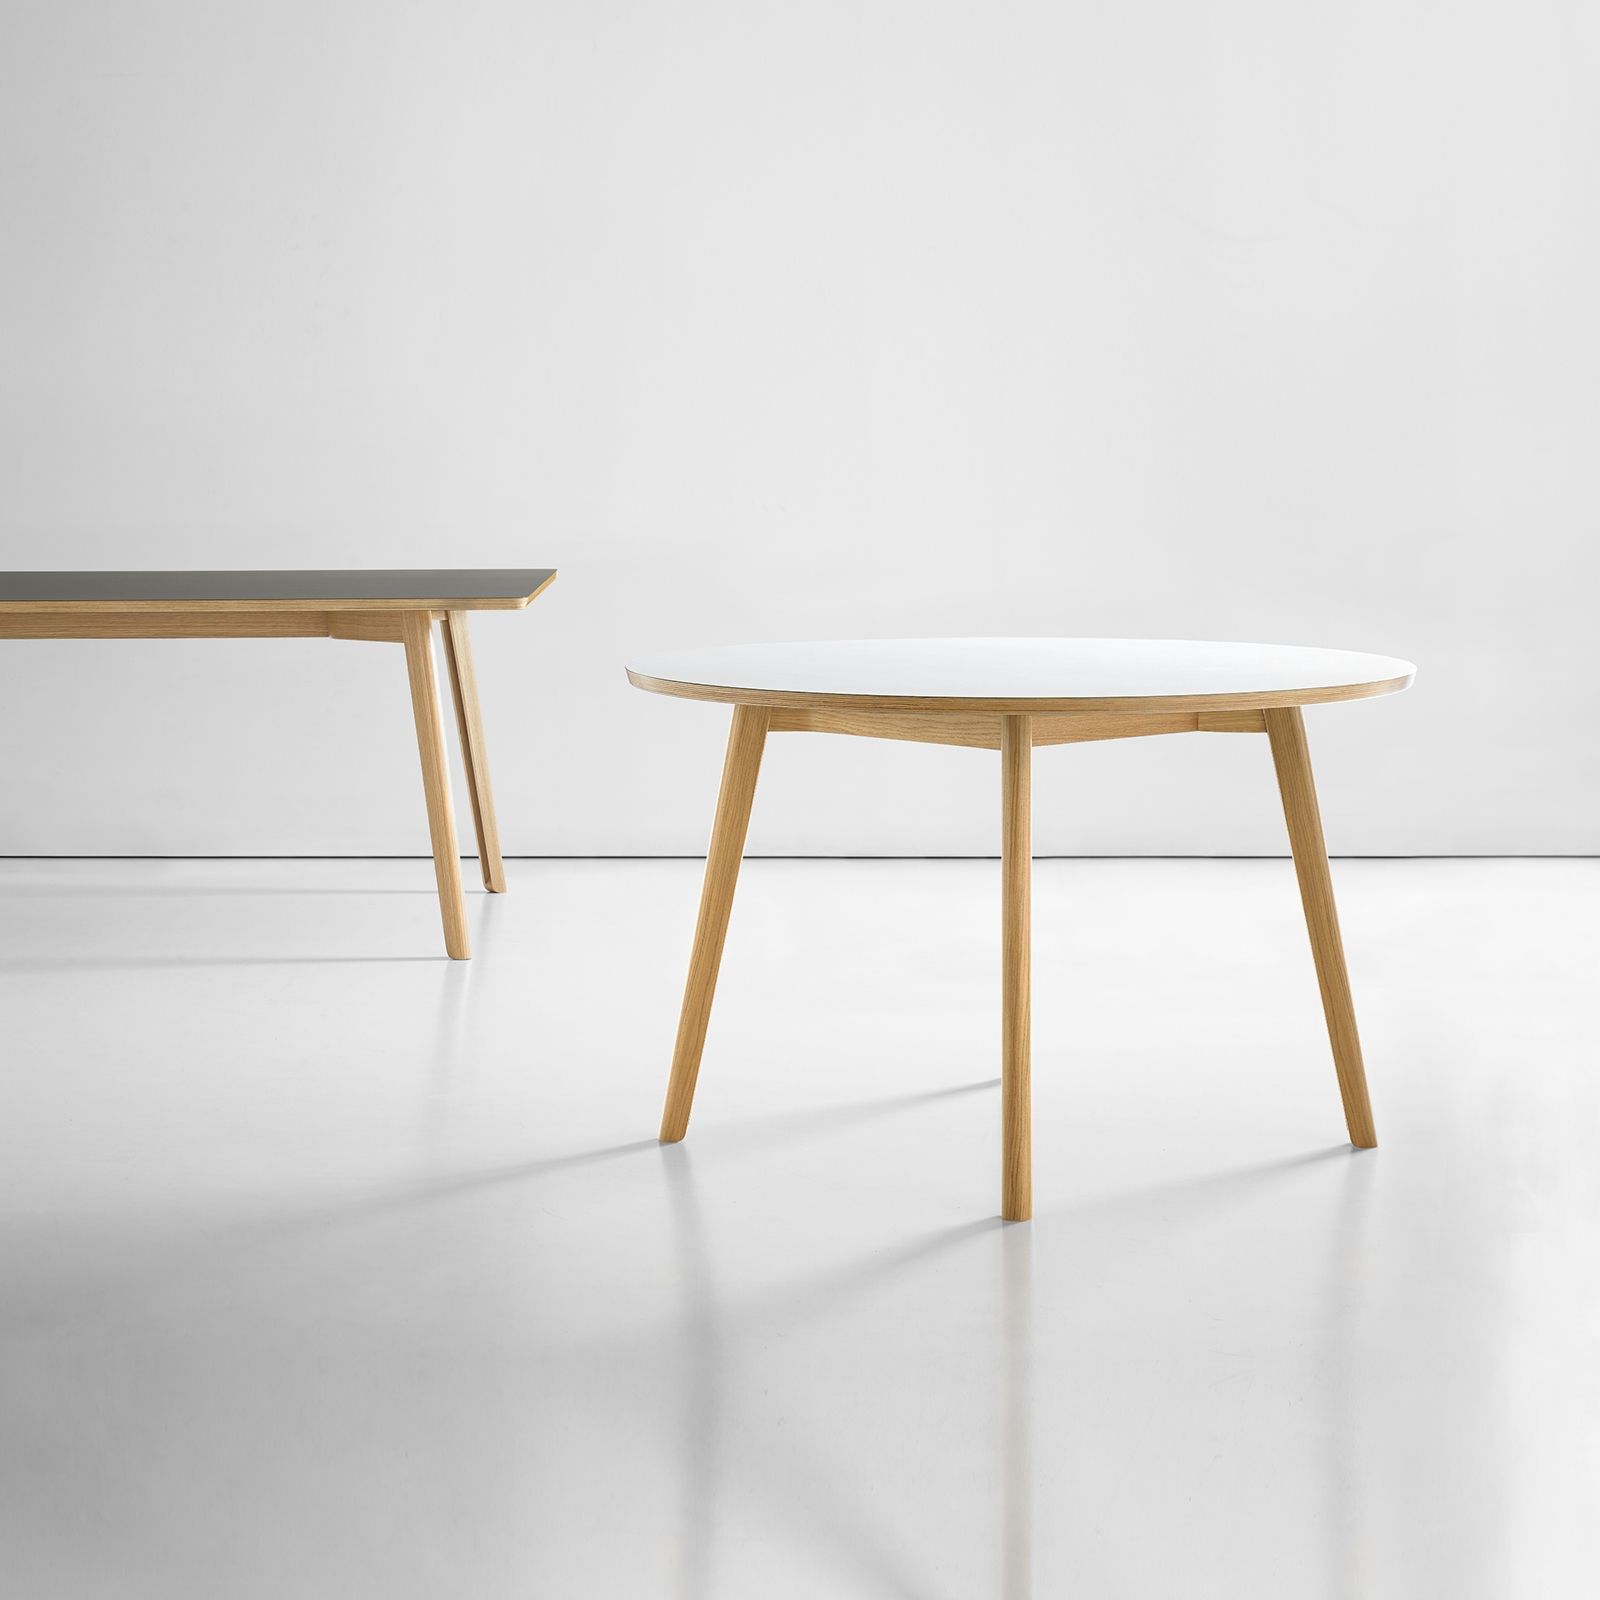 SOLEM TABLE